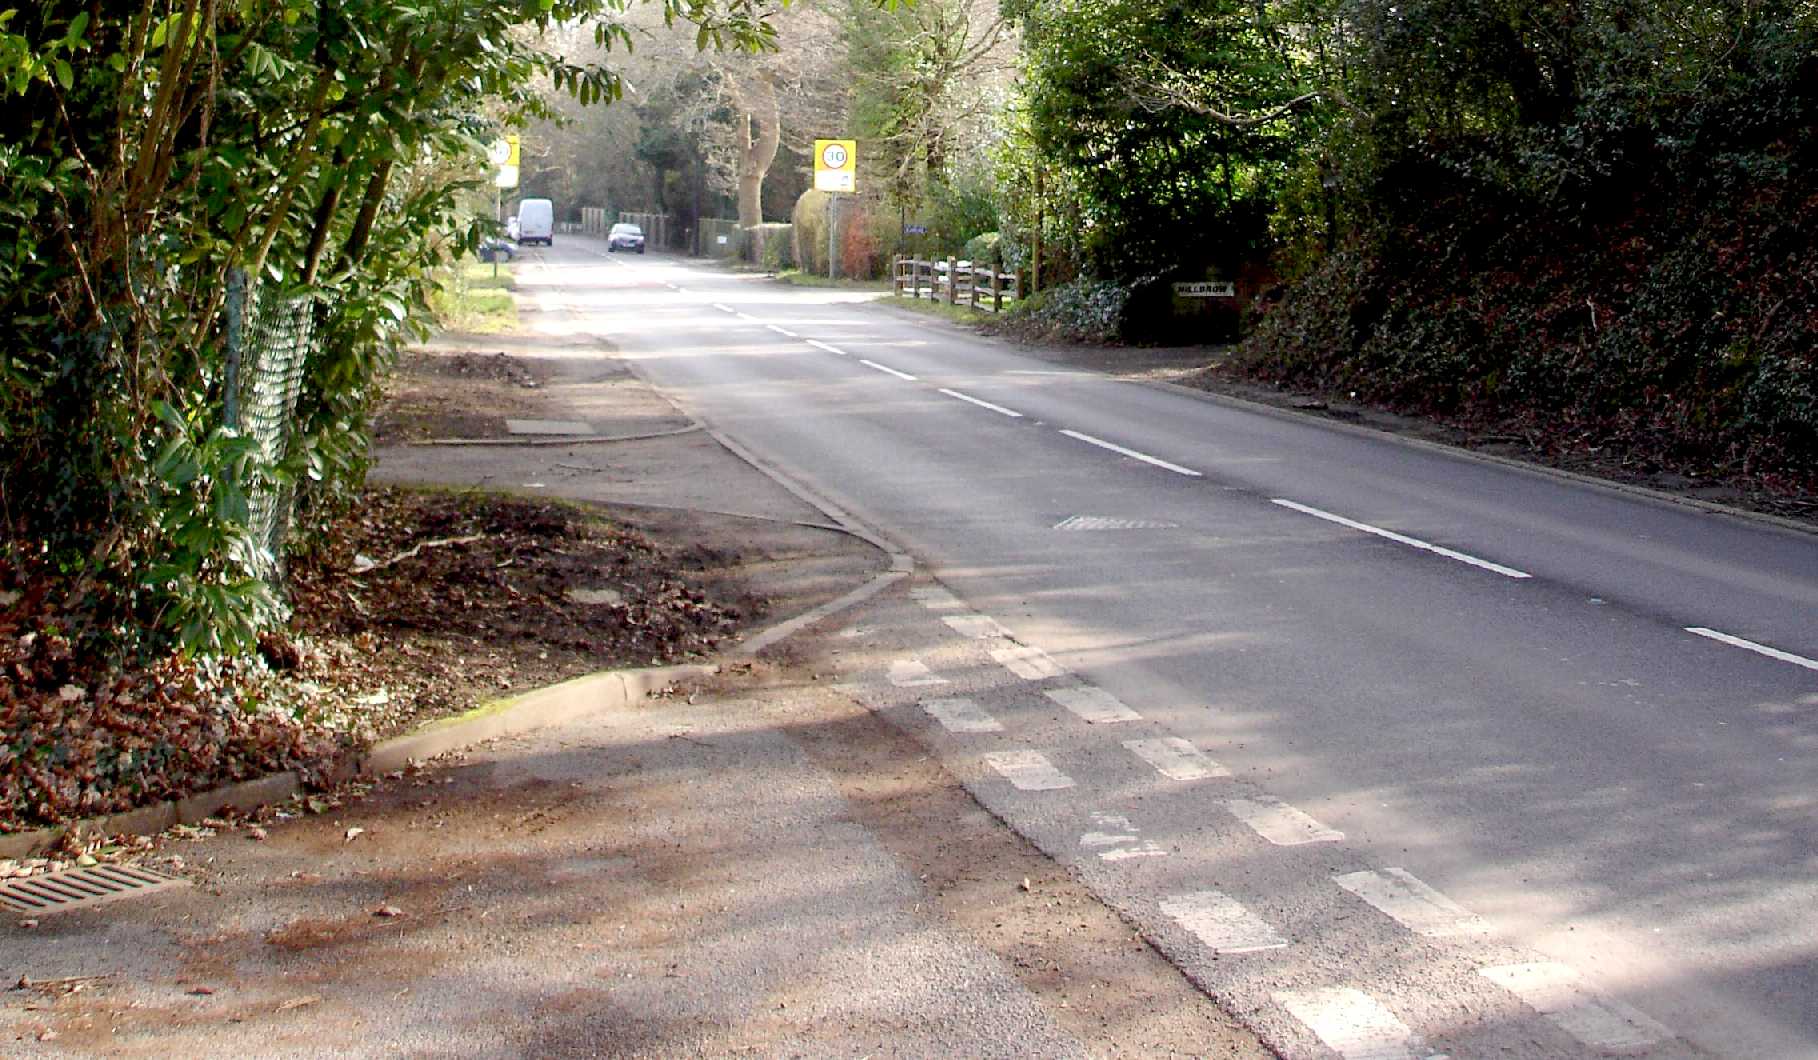 Visibility splay at Horam in East Sussex, refused permission as dangerous